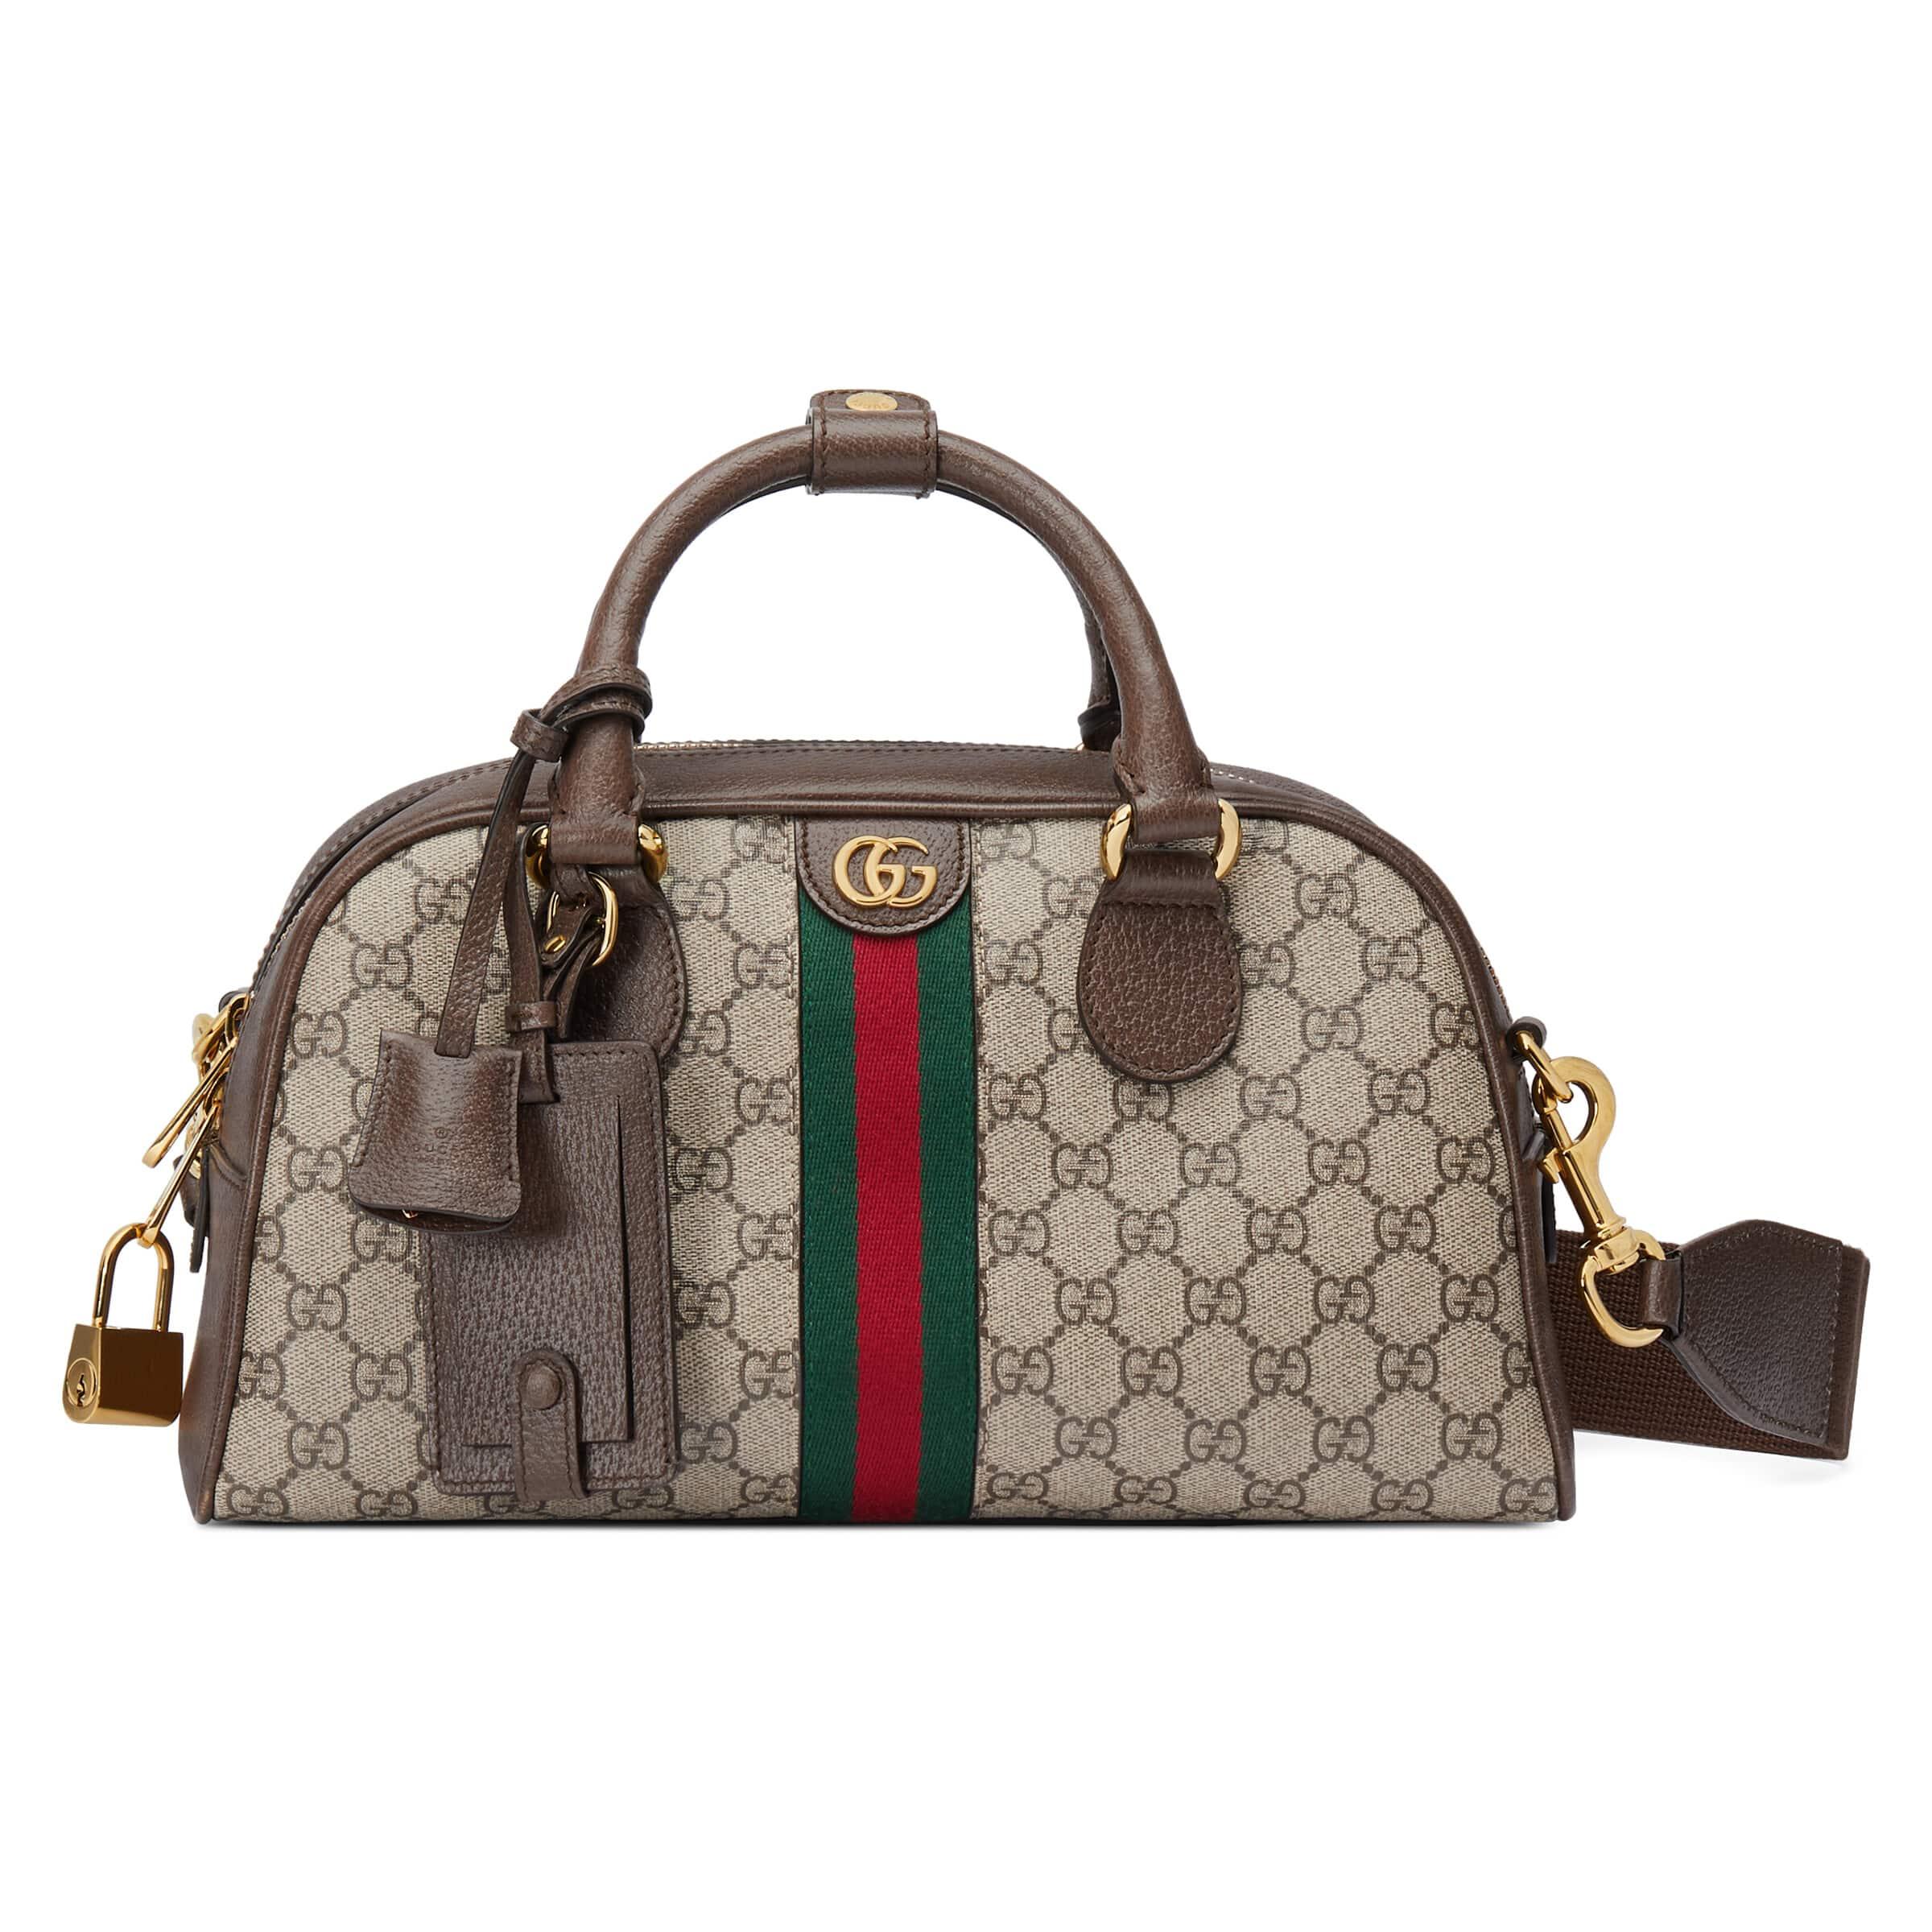 Gucci Ophidia Medium GG Top Handle Bag in Brown | Lyst